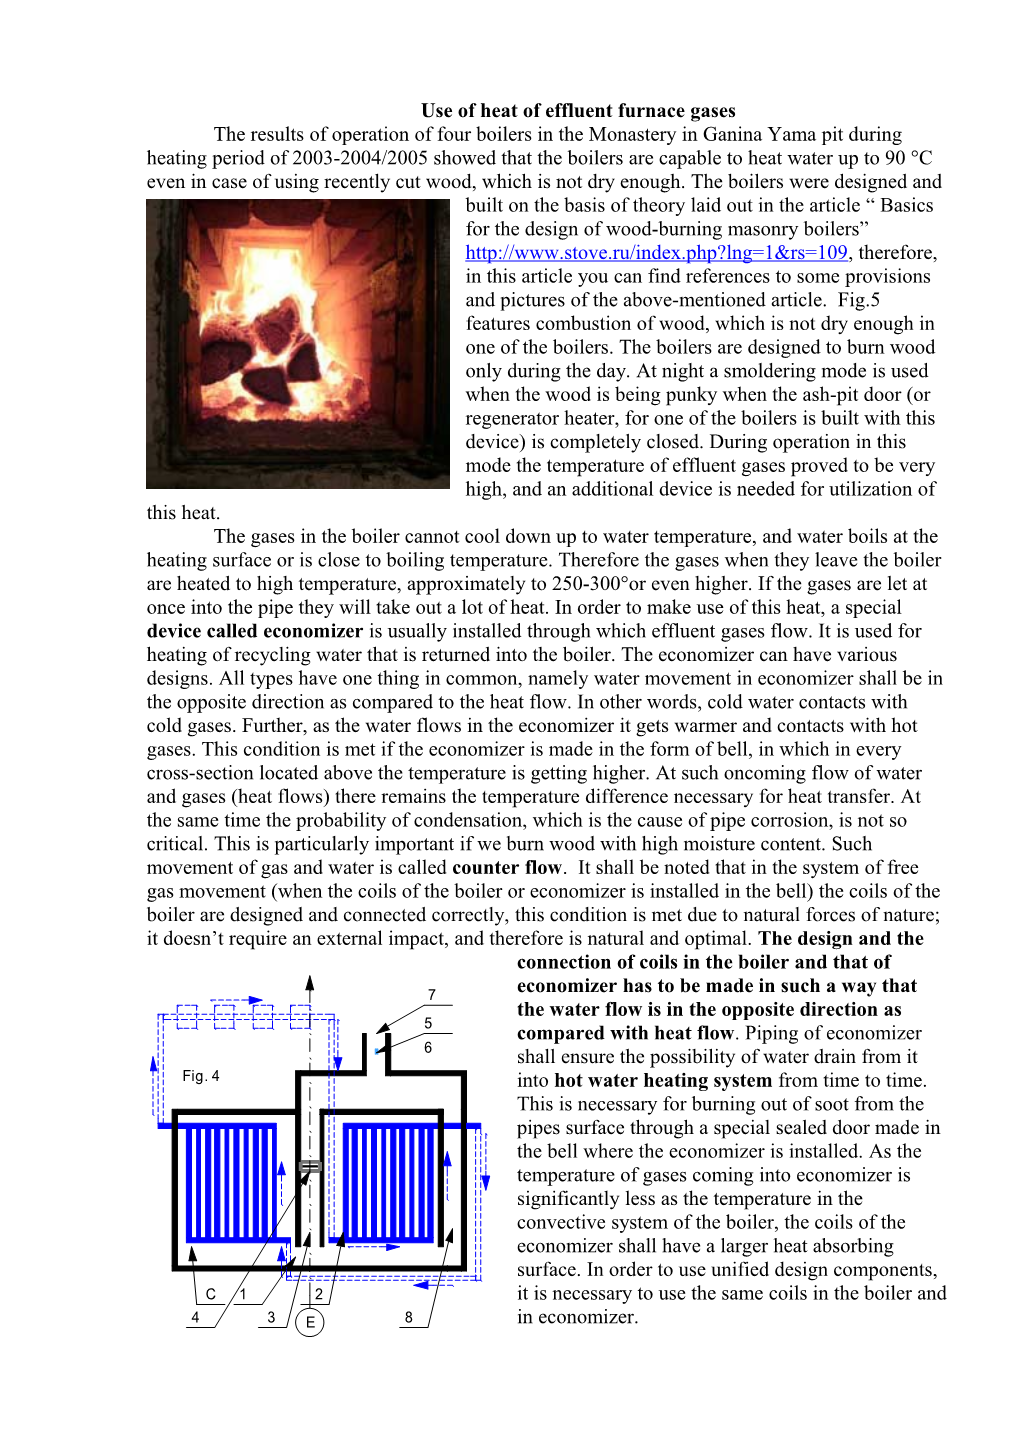 Use of Heat of Effluent Furnace Gases